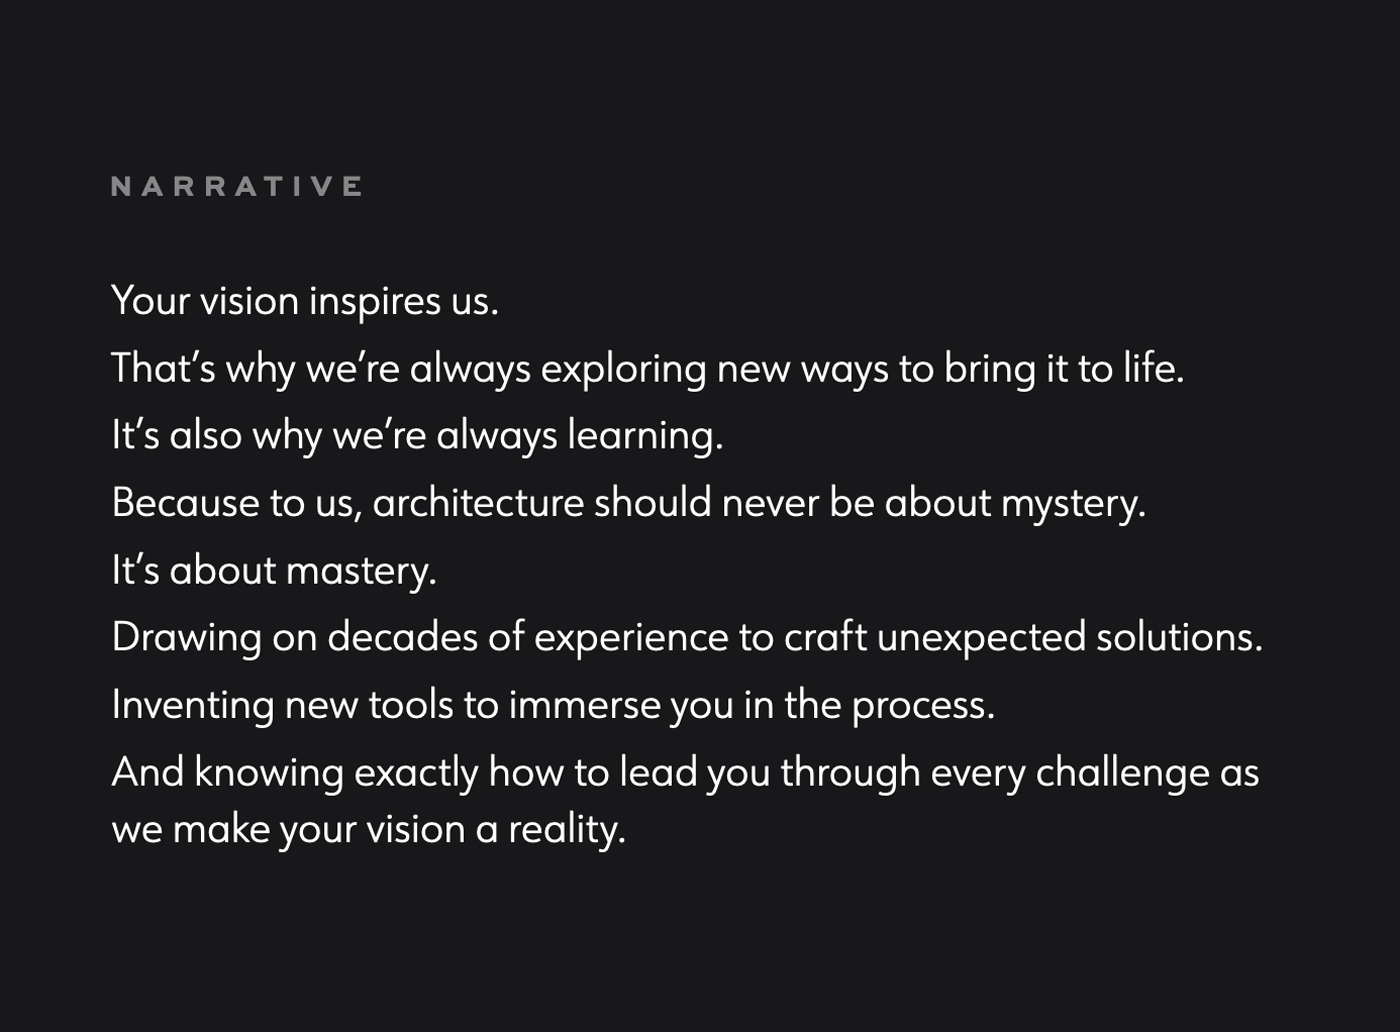 M+H Architects brand narrative, which begins "Your vision inspires us. It's why we're always exploring new ways to bring it to life. It's also why we're always learning..."